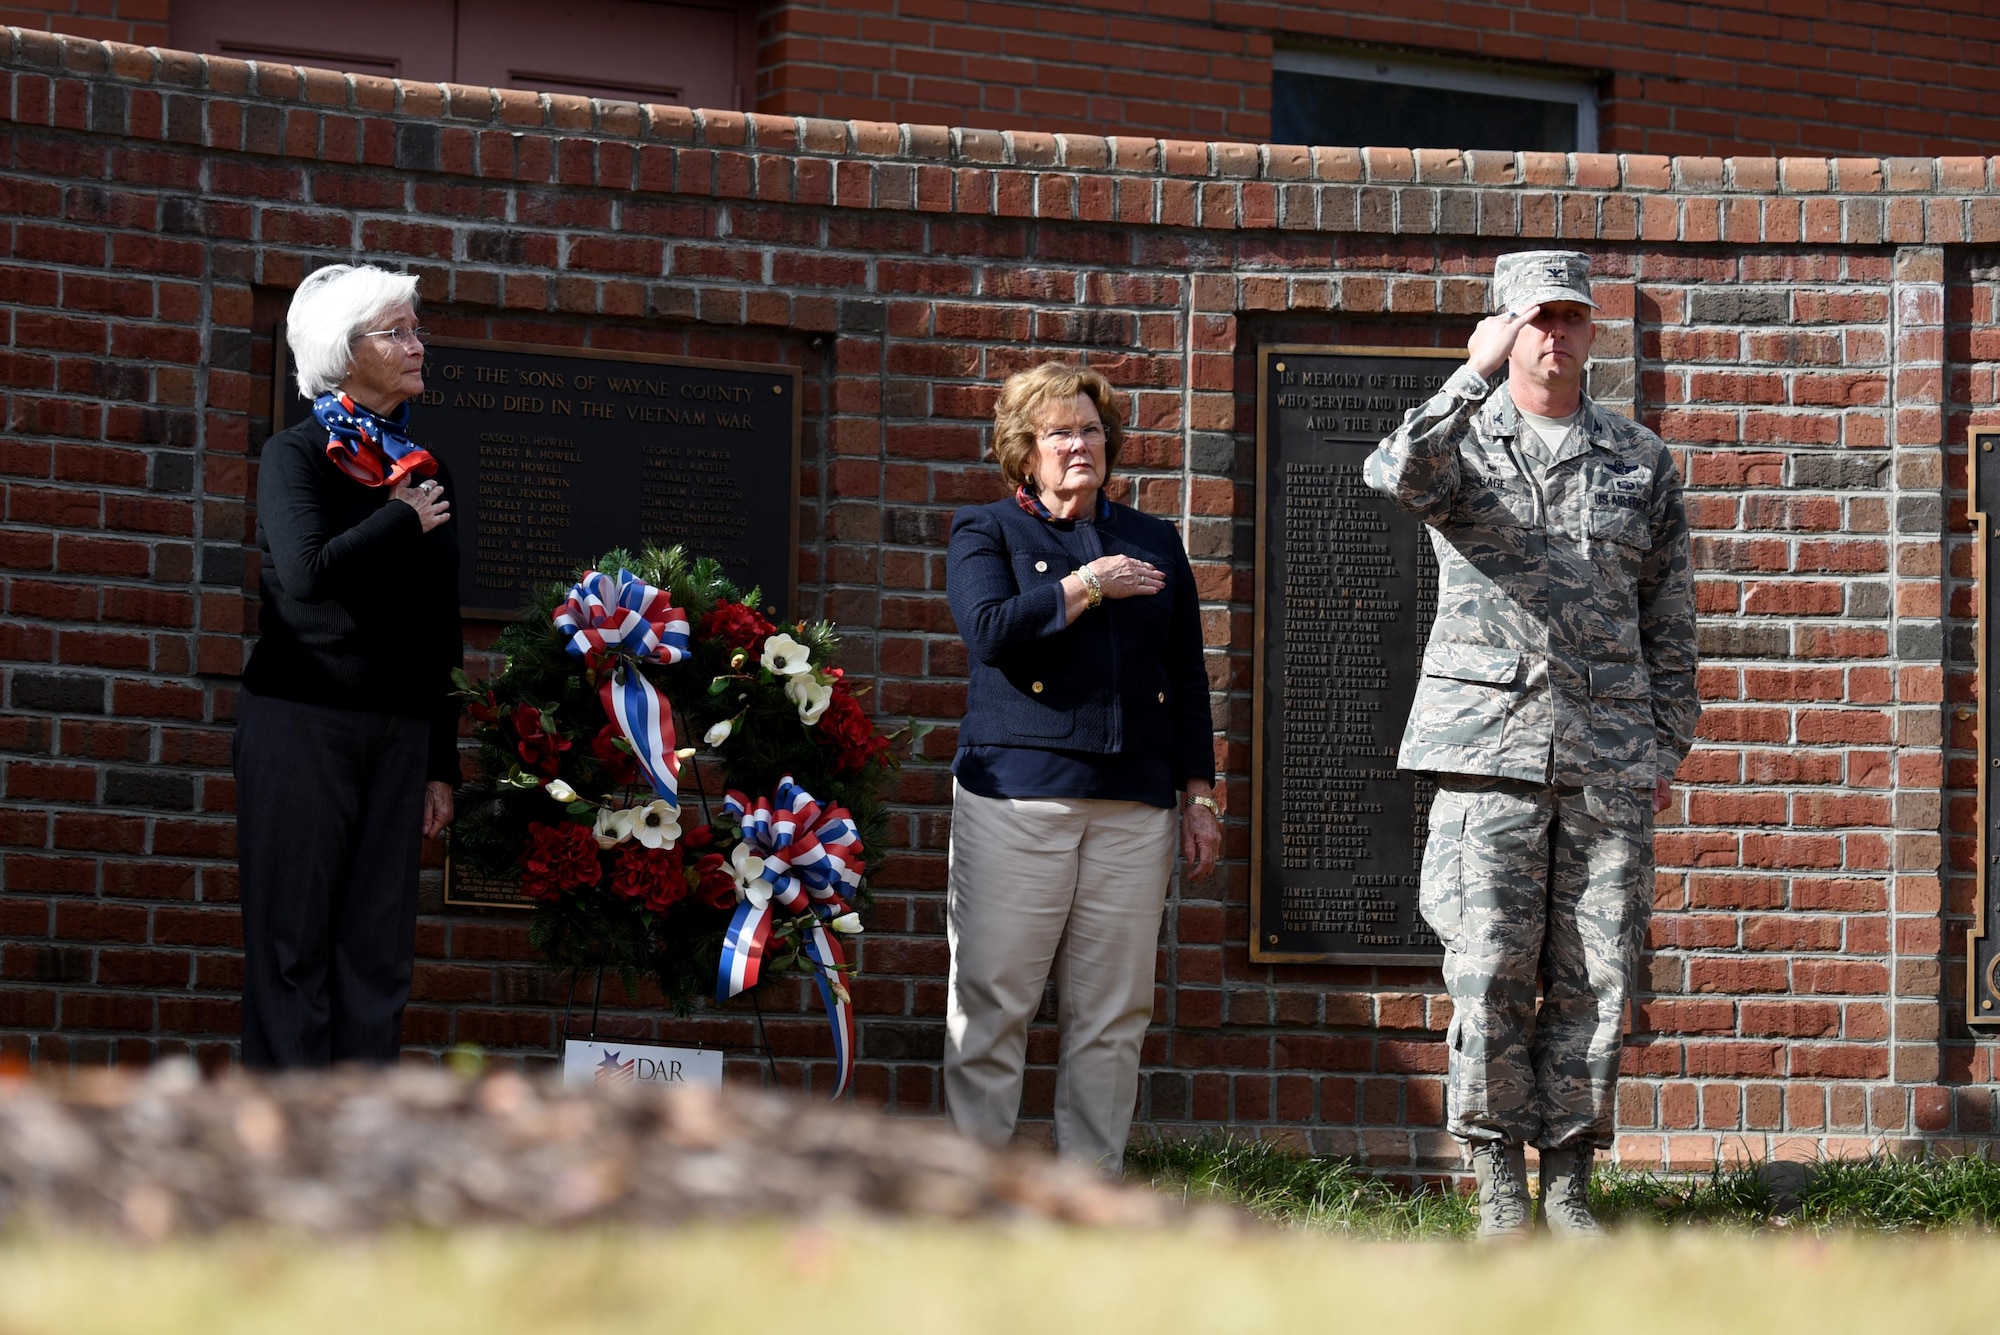 Col. Christopher Sage, 4th Fighter Wing commander, renders a salute during a wreath laying ceremony, Nov. 11, 2016, in Goldsboro, North Carolina. Sage showed his respect to the sacrifice of America's veterans by placing a wreath at the Wayne County Veterans Memorial. (U.S. Air Force photo by Airman 1st Class Kenneth Boyton)